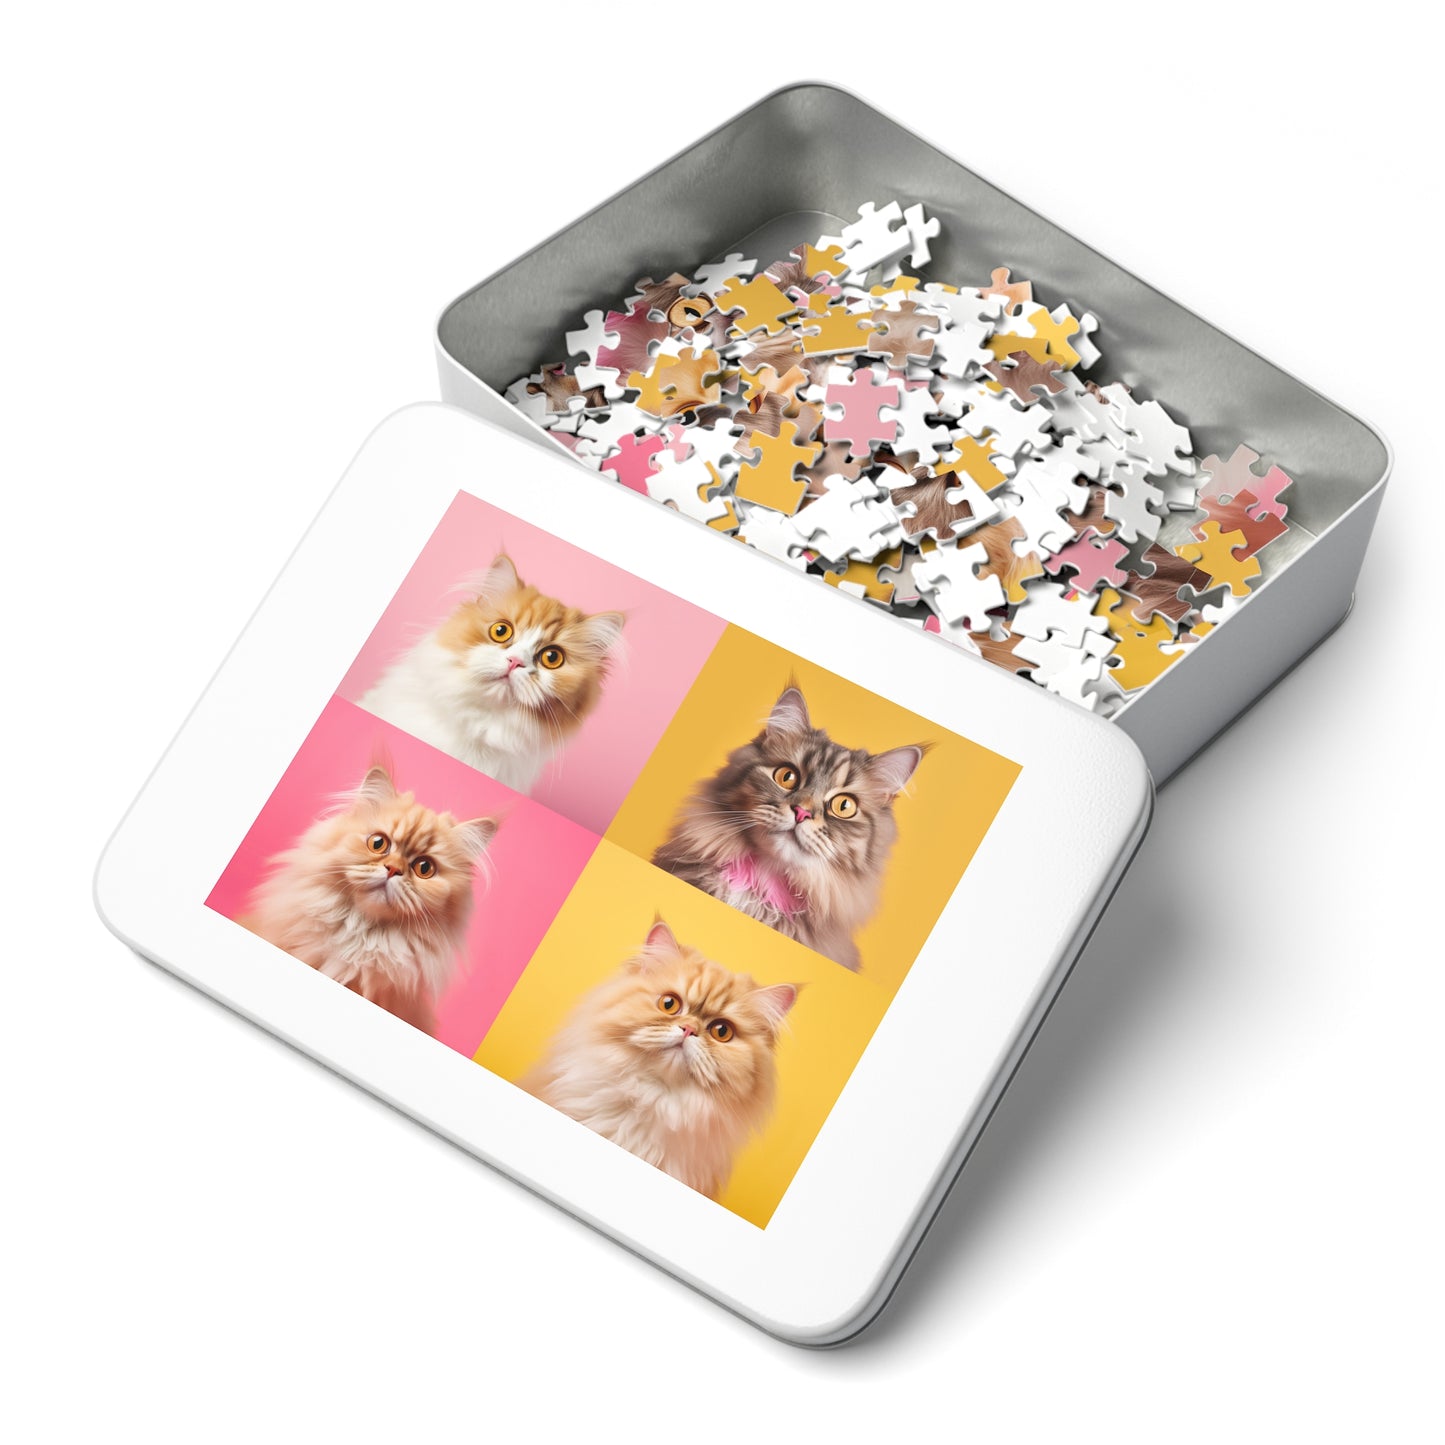 4 Adorable Cats • Jigsaw Puzzle